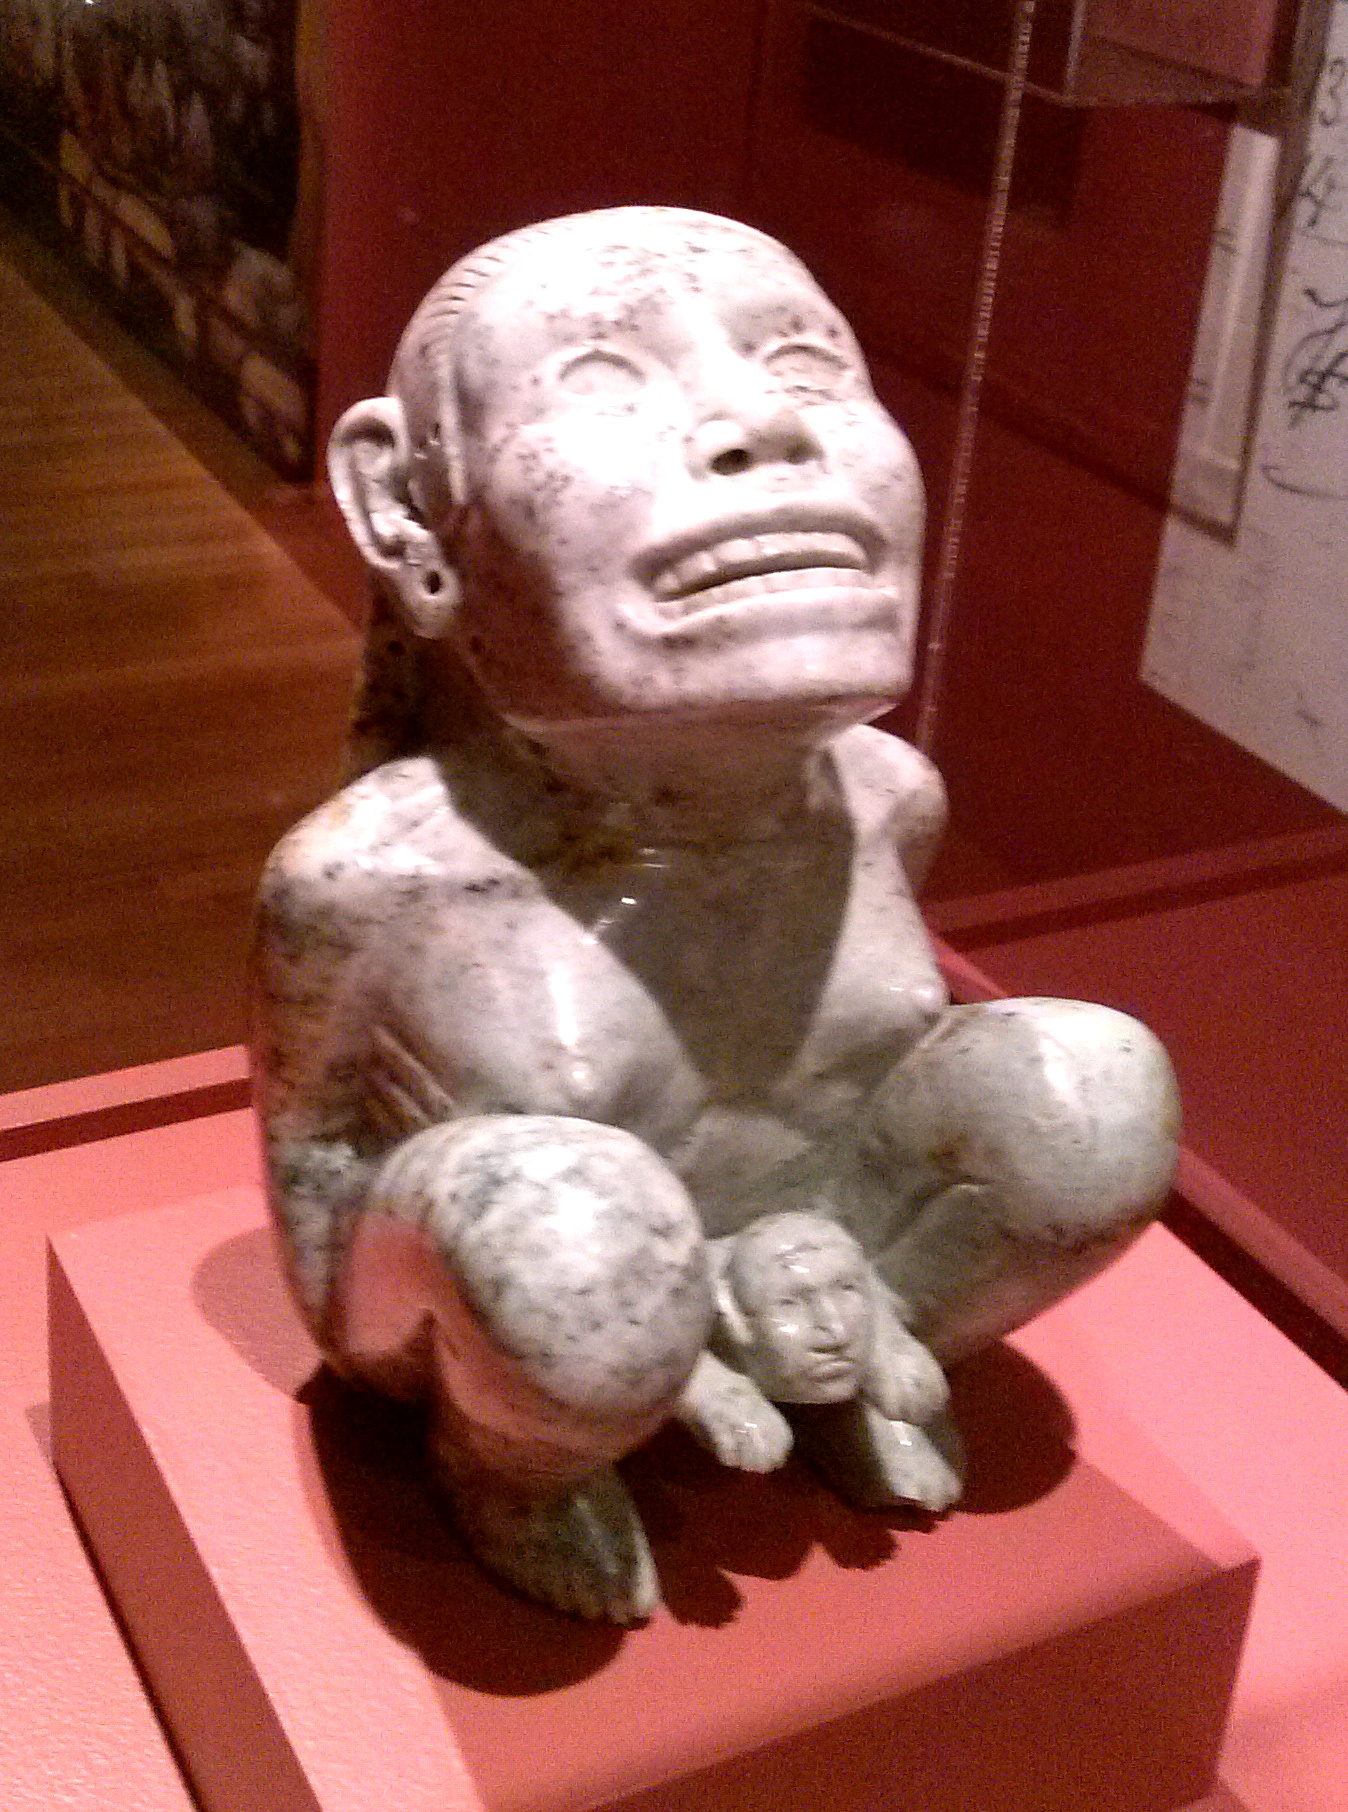 The famous Aztec birthing figure from Dumbarton Oaks, often associated with the Aztec goddess Tlazolteotl. Recent microscopic analysis of the incisions and holes has determined that they were made by modern tools. Photograph courtesy of Madman2001 via Wikimedia Commons